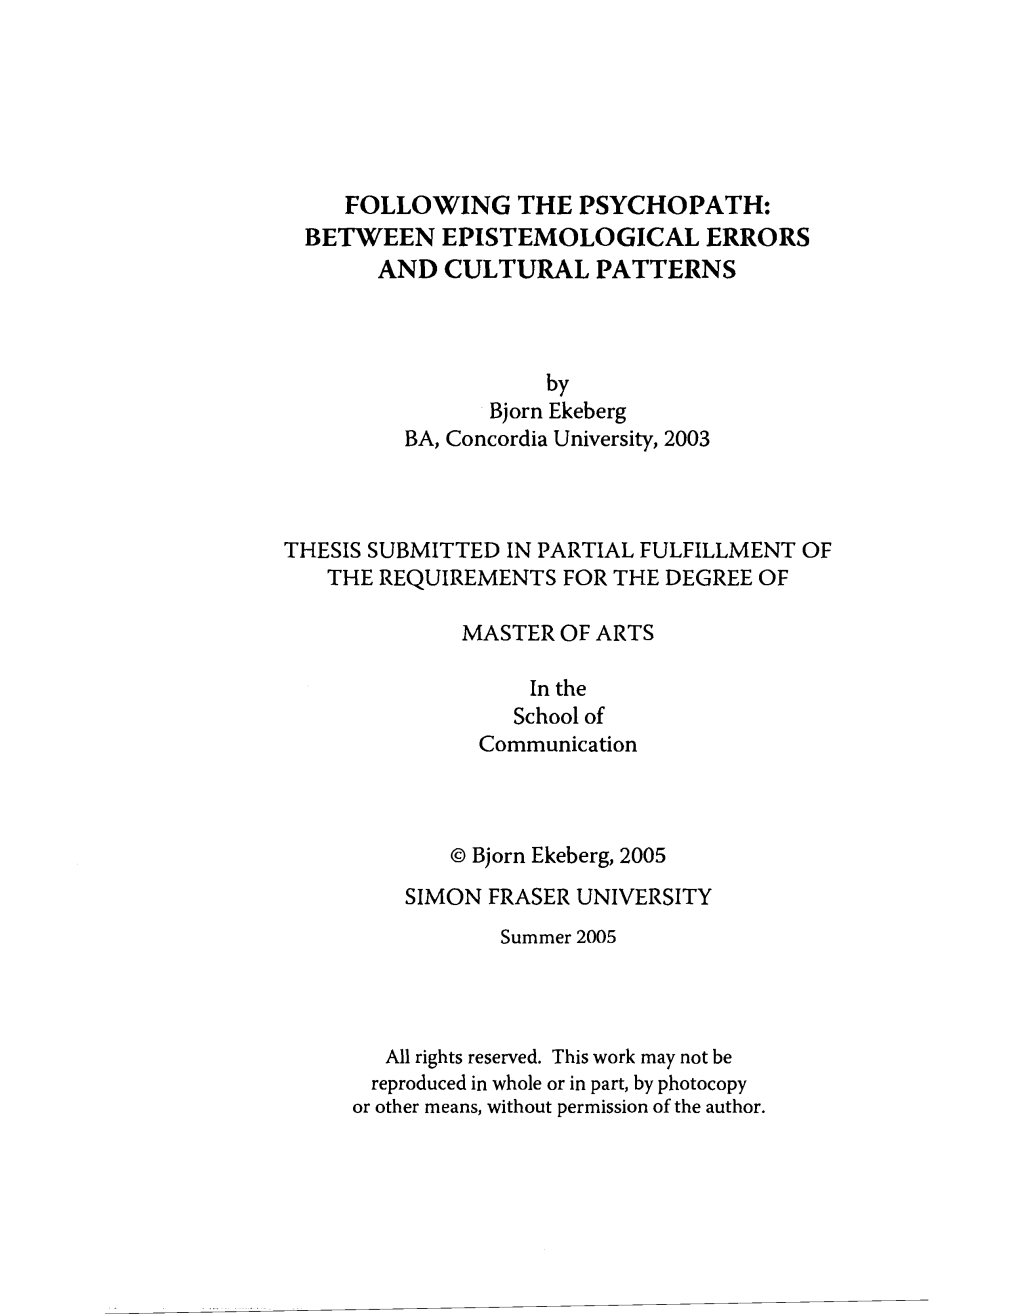 Following the Psychopath: Between Epistemological Errors and Cultural Patterns